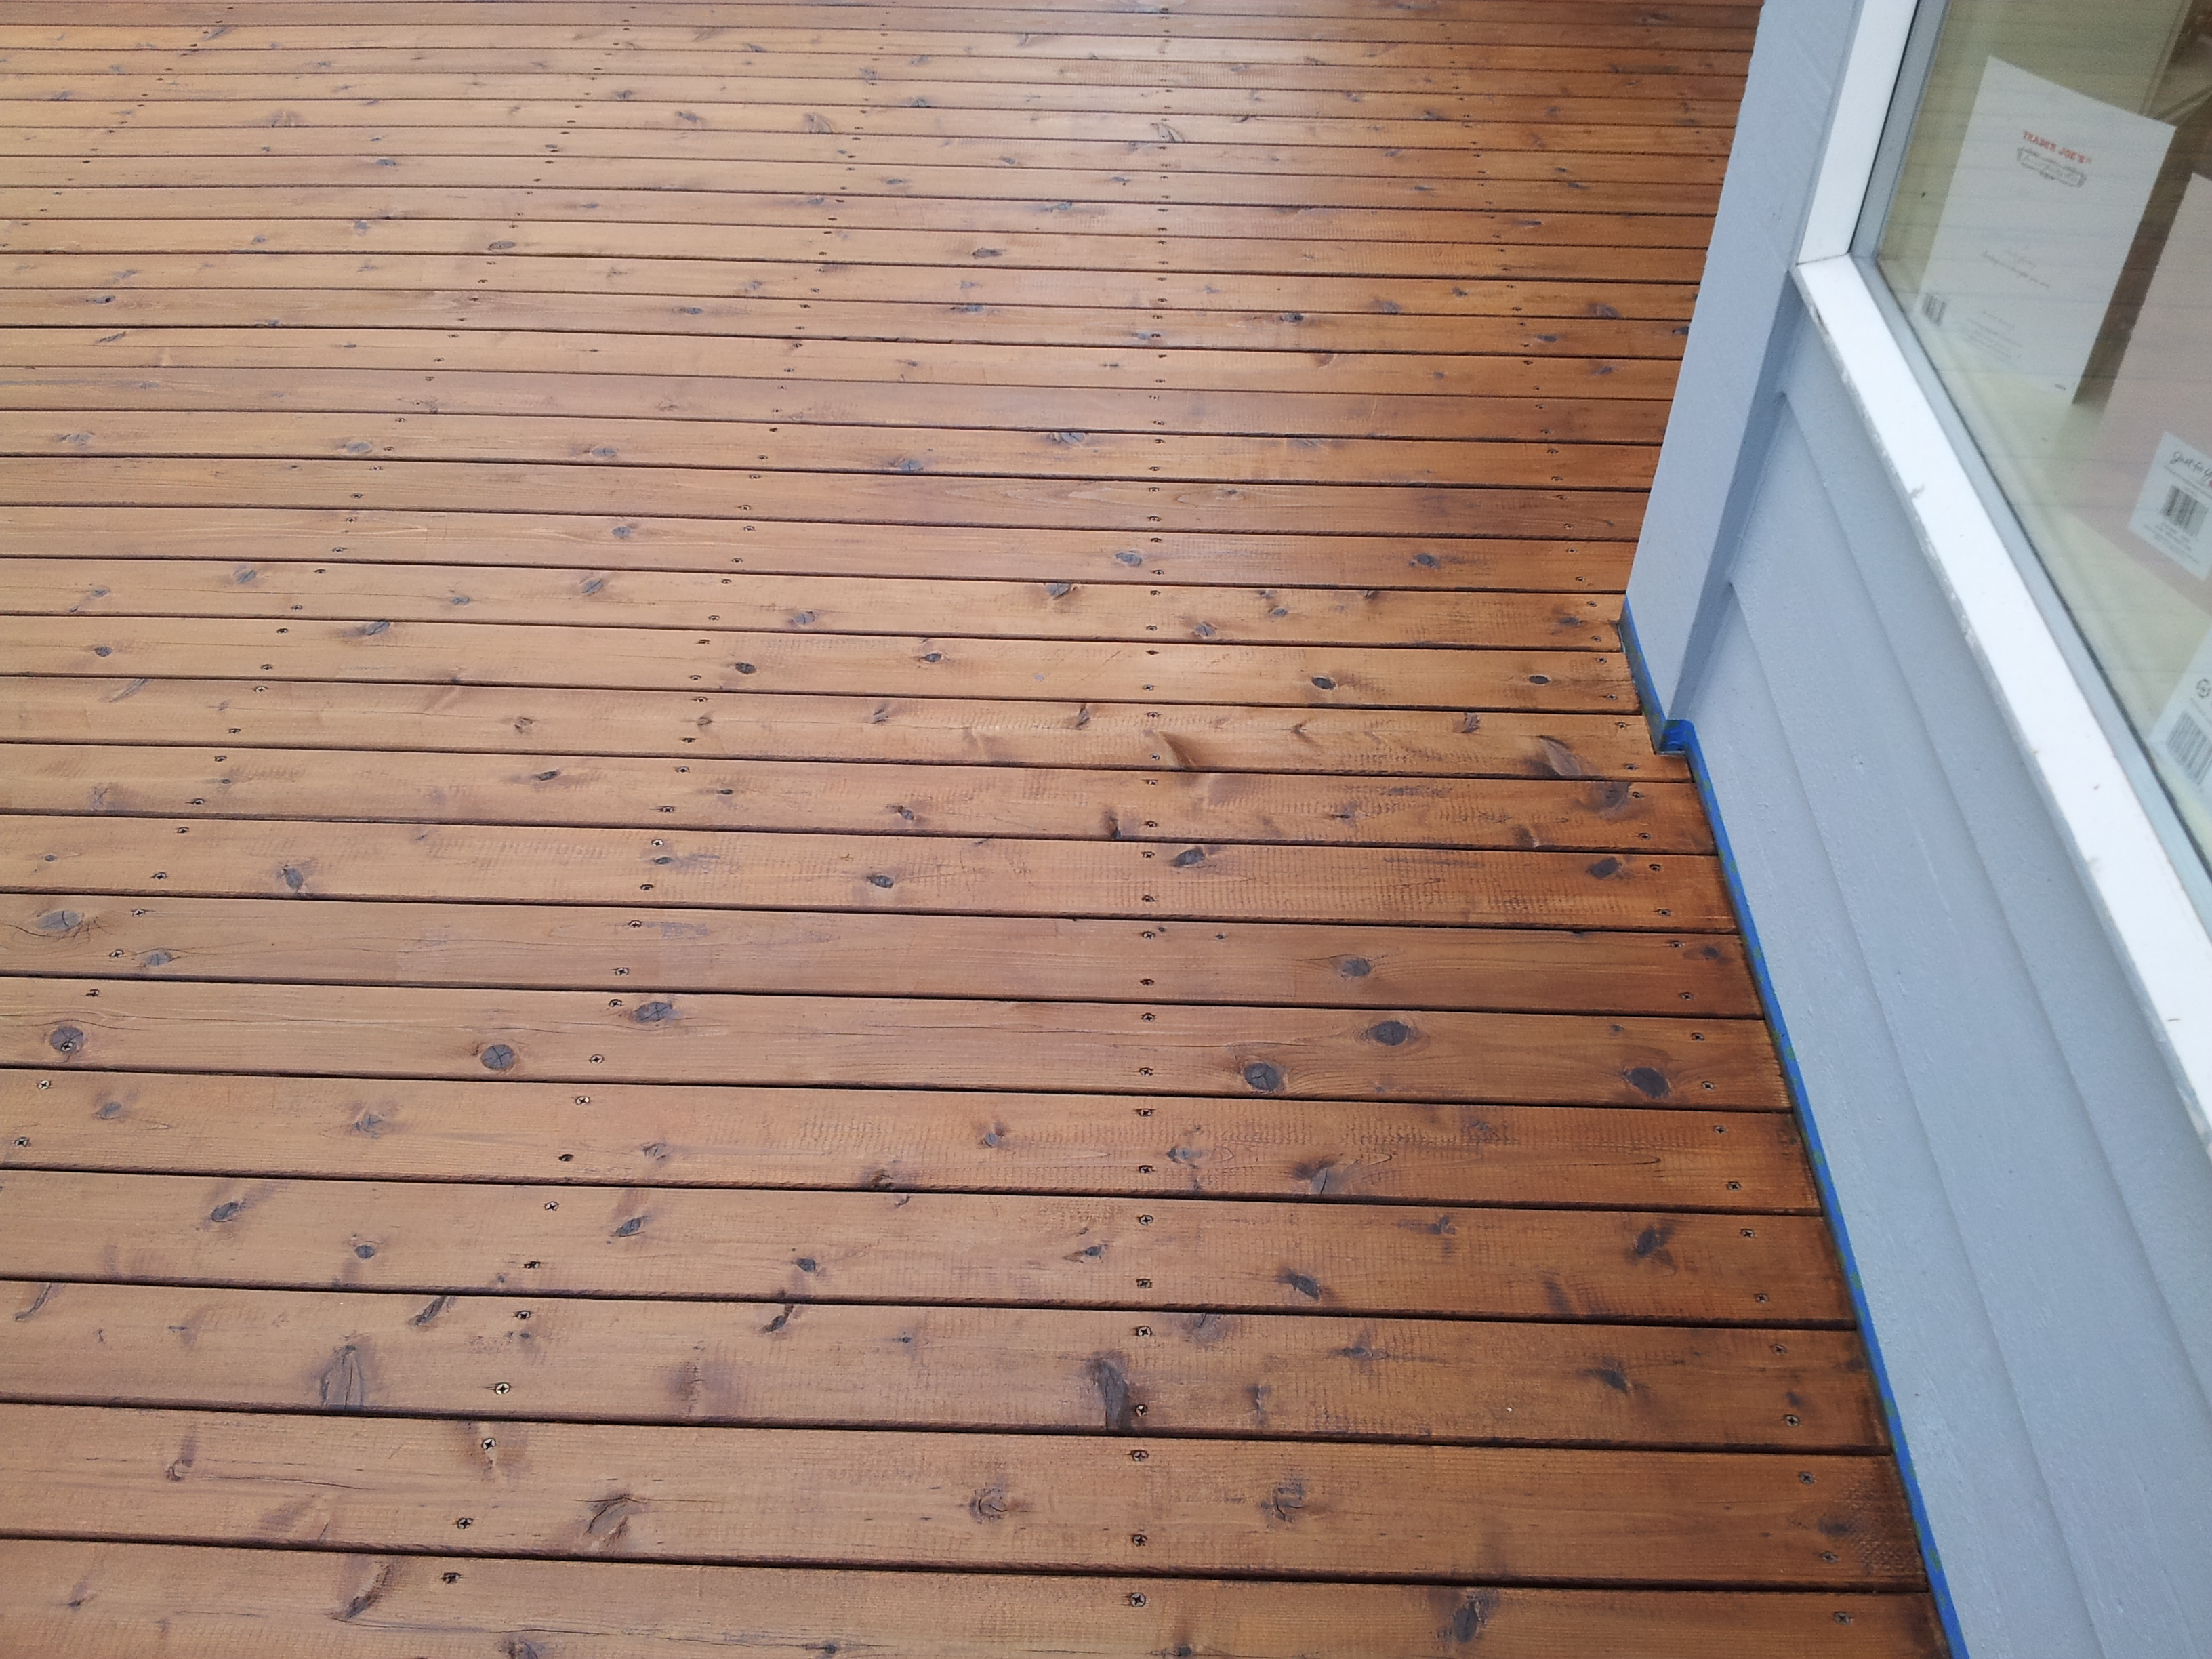 Oil Based Deck Stains 2018 Best Deck Stain Reviews Ratings regarding size 3264 X 2448